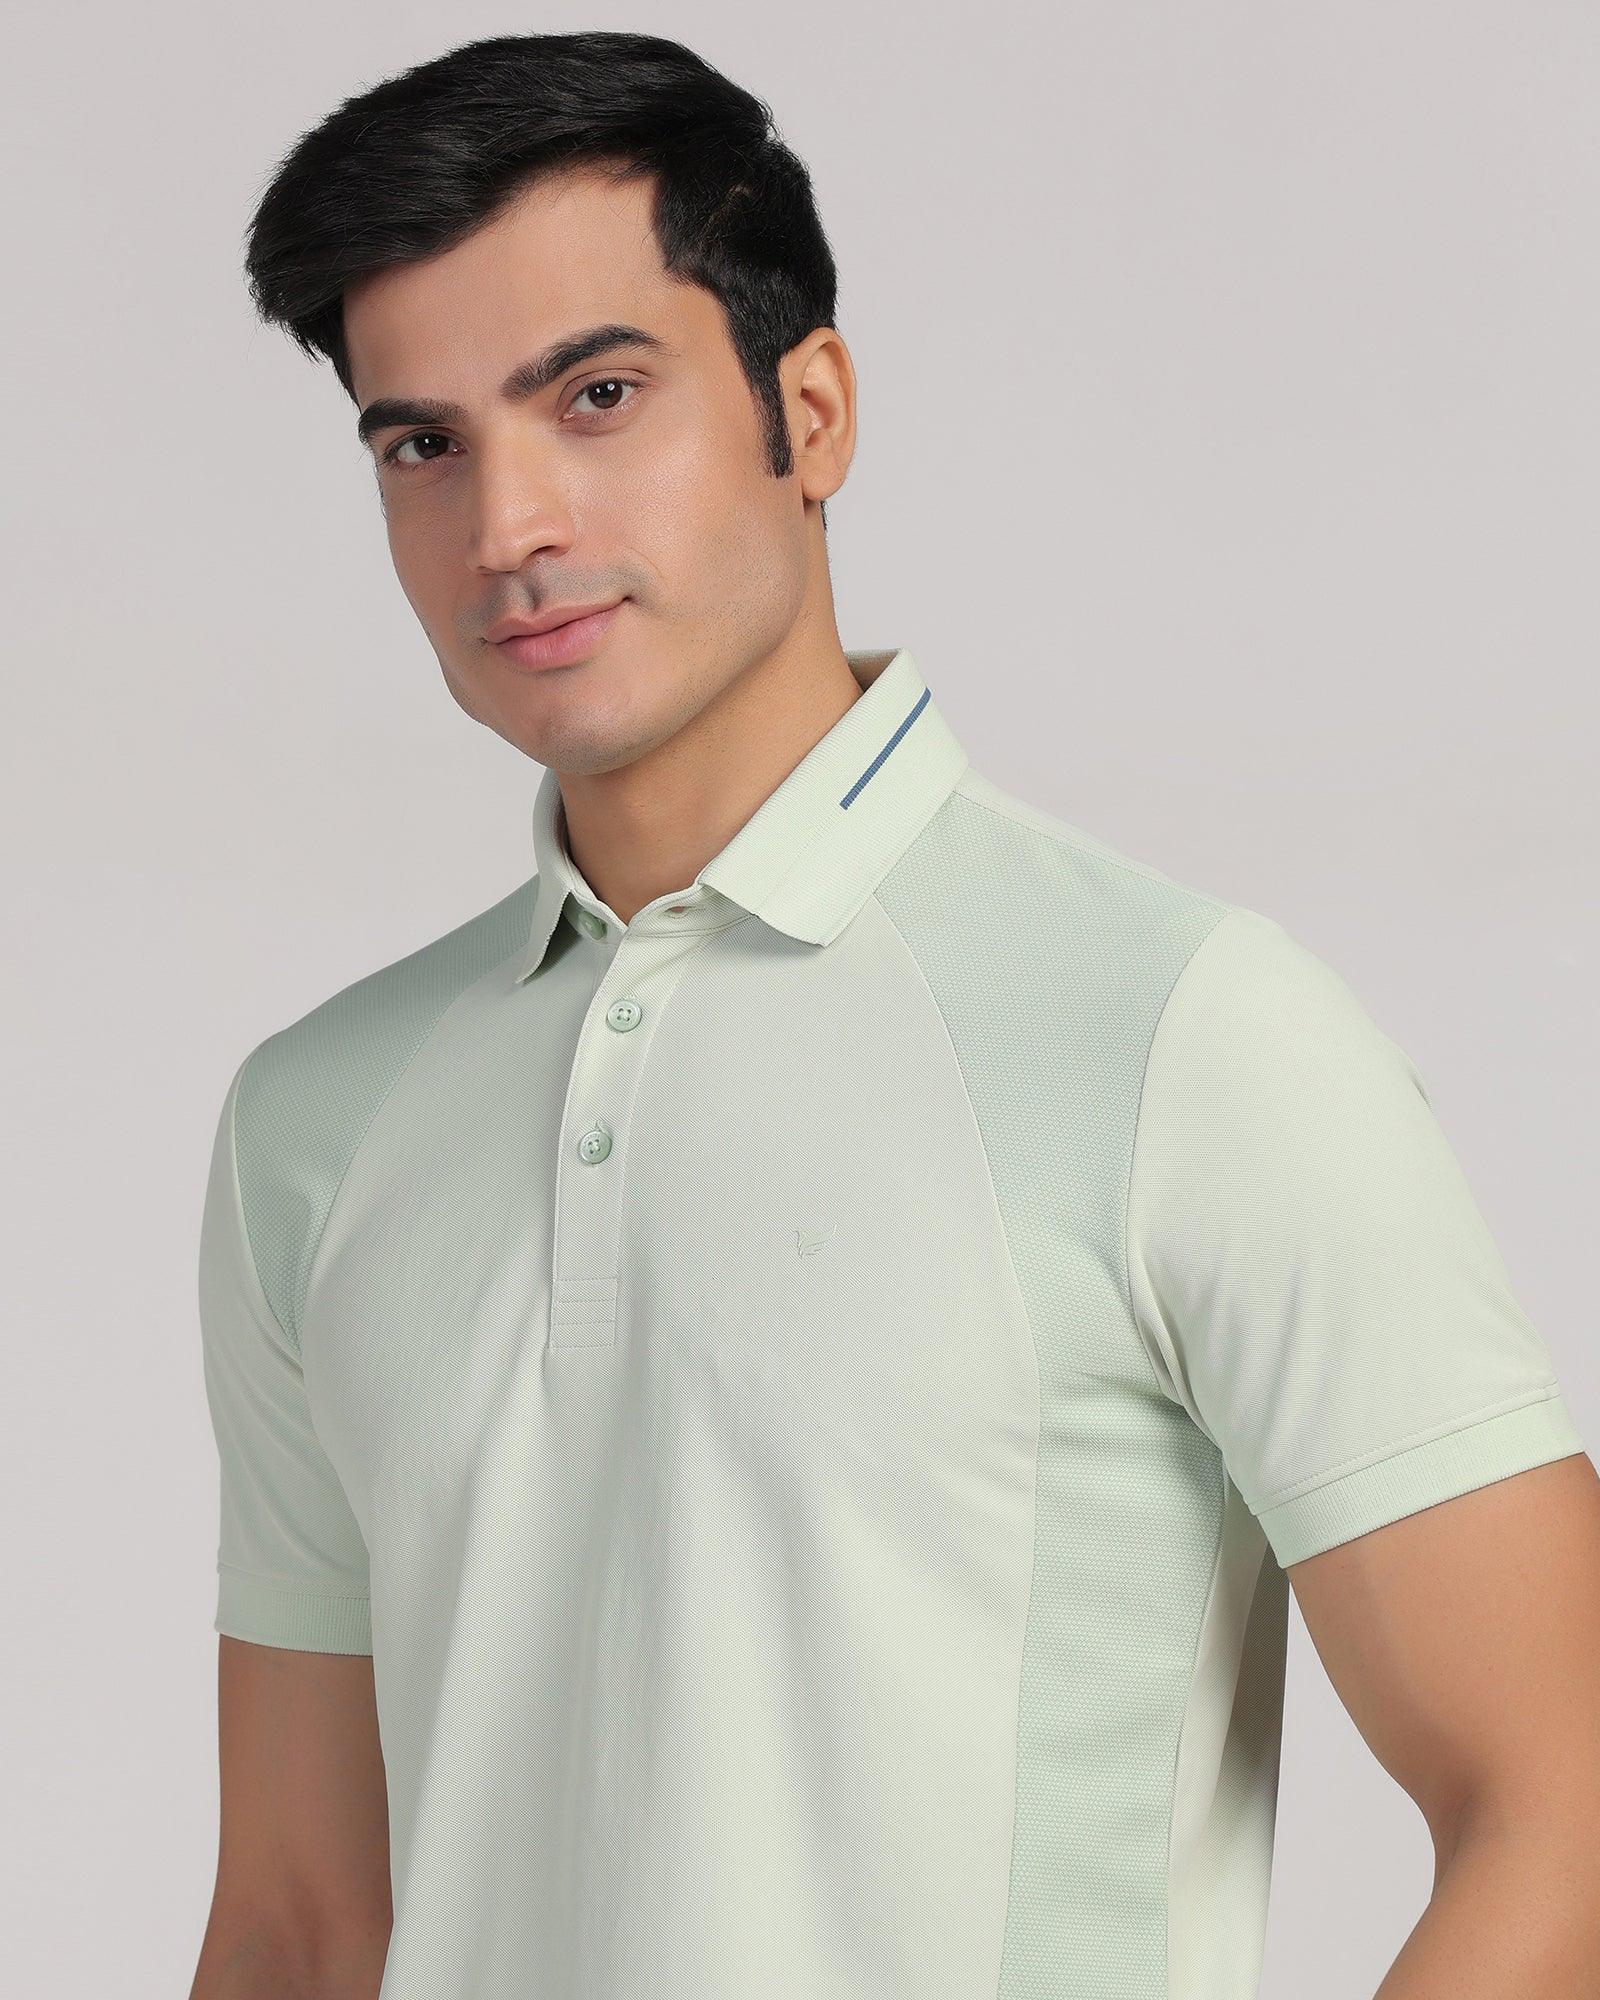 TechPro Polo Mint Solid T-Shirt - Weber